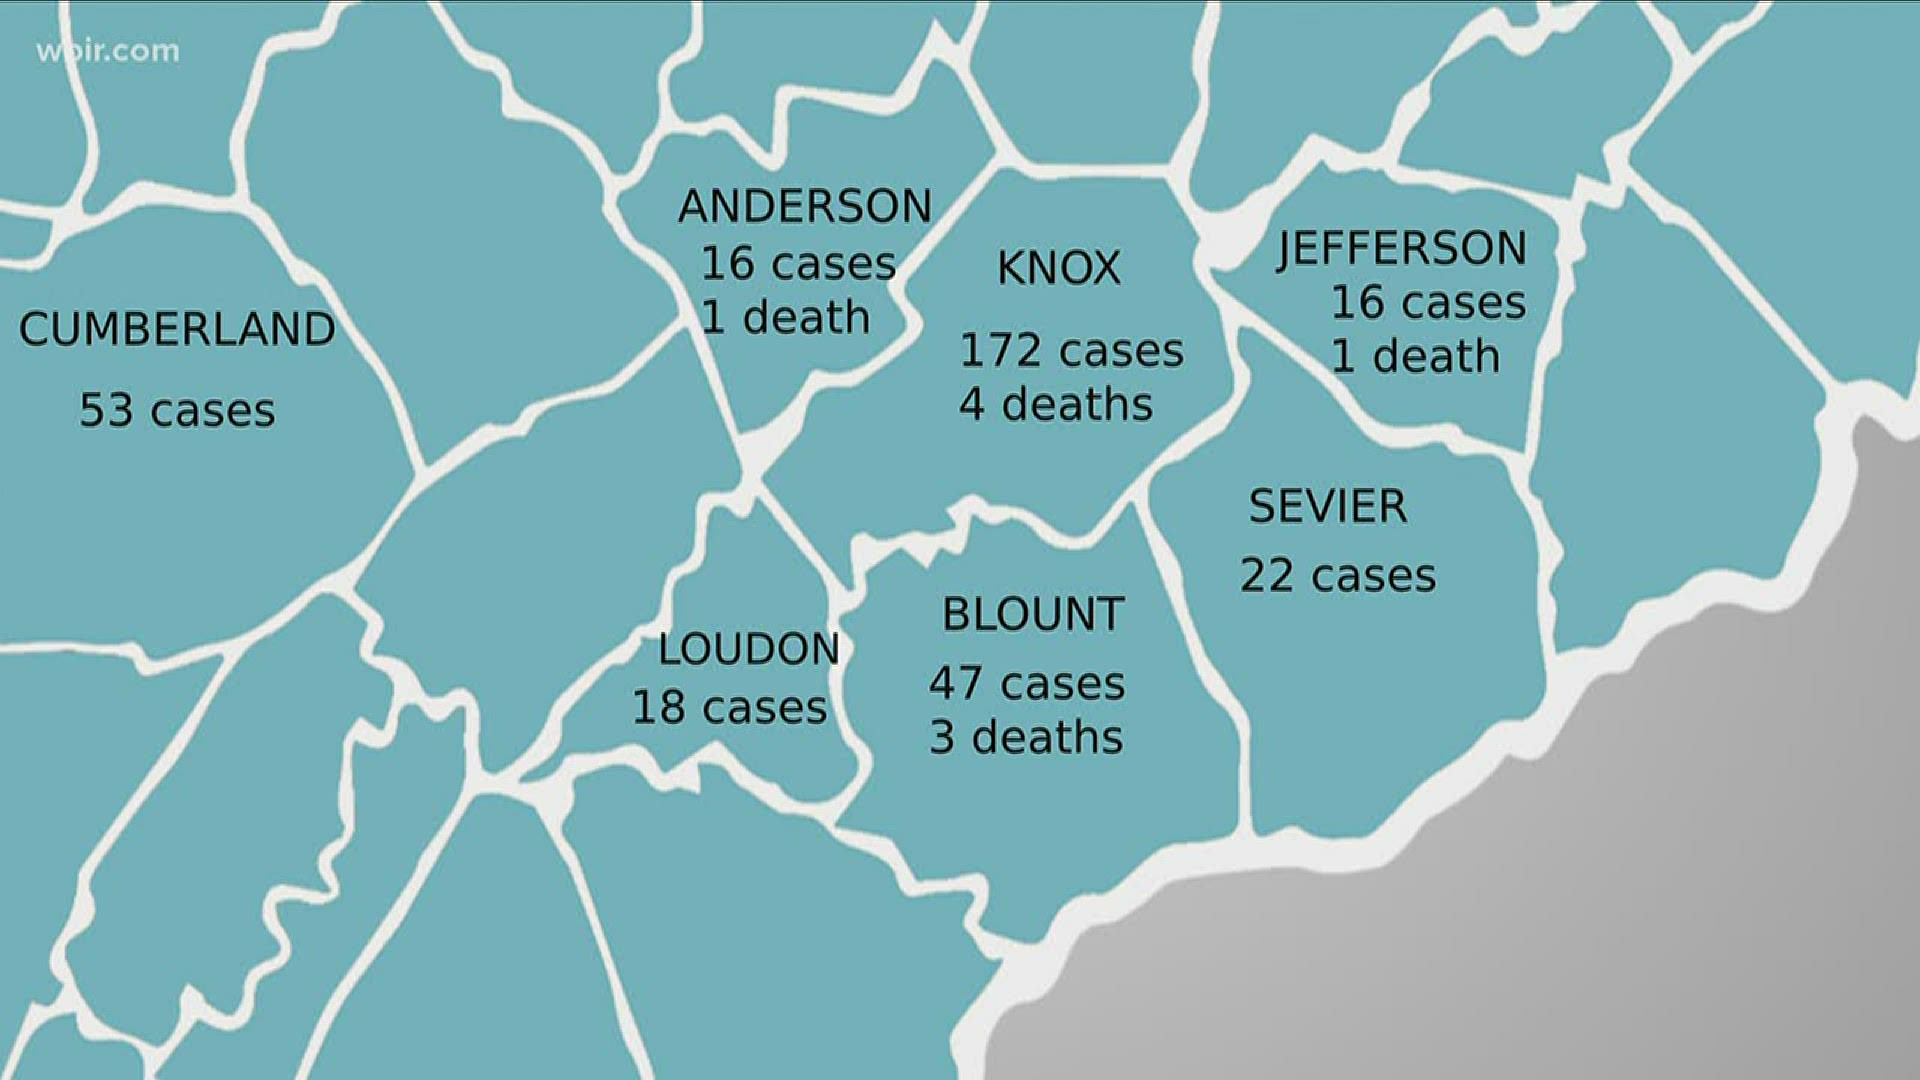 The number of cases in Tennessee topped 6,000 Wednesday, but positive signs are showing with more than a third of those cases having recovered.